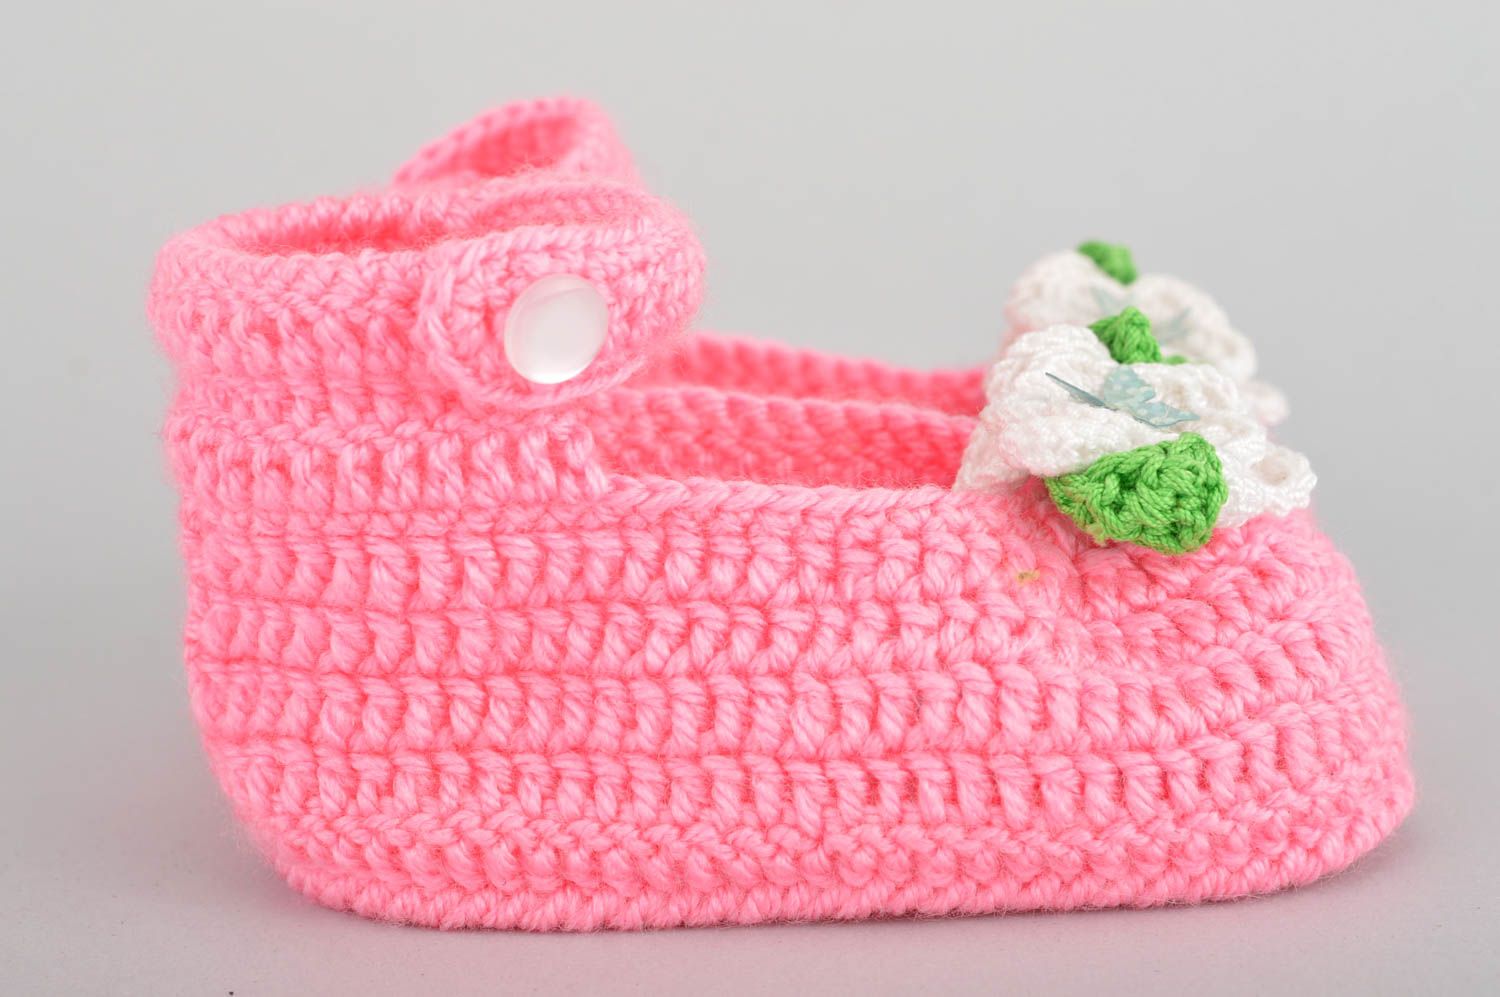 Crocheted designer handmade pink baby bootees made of cotton for girls photo 3